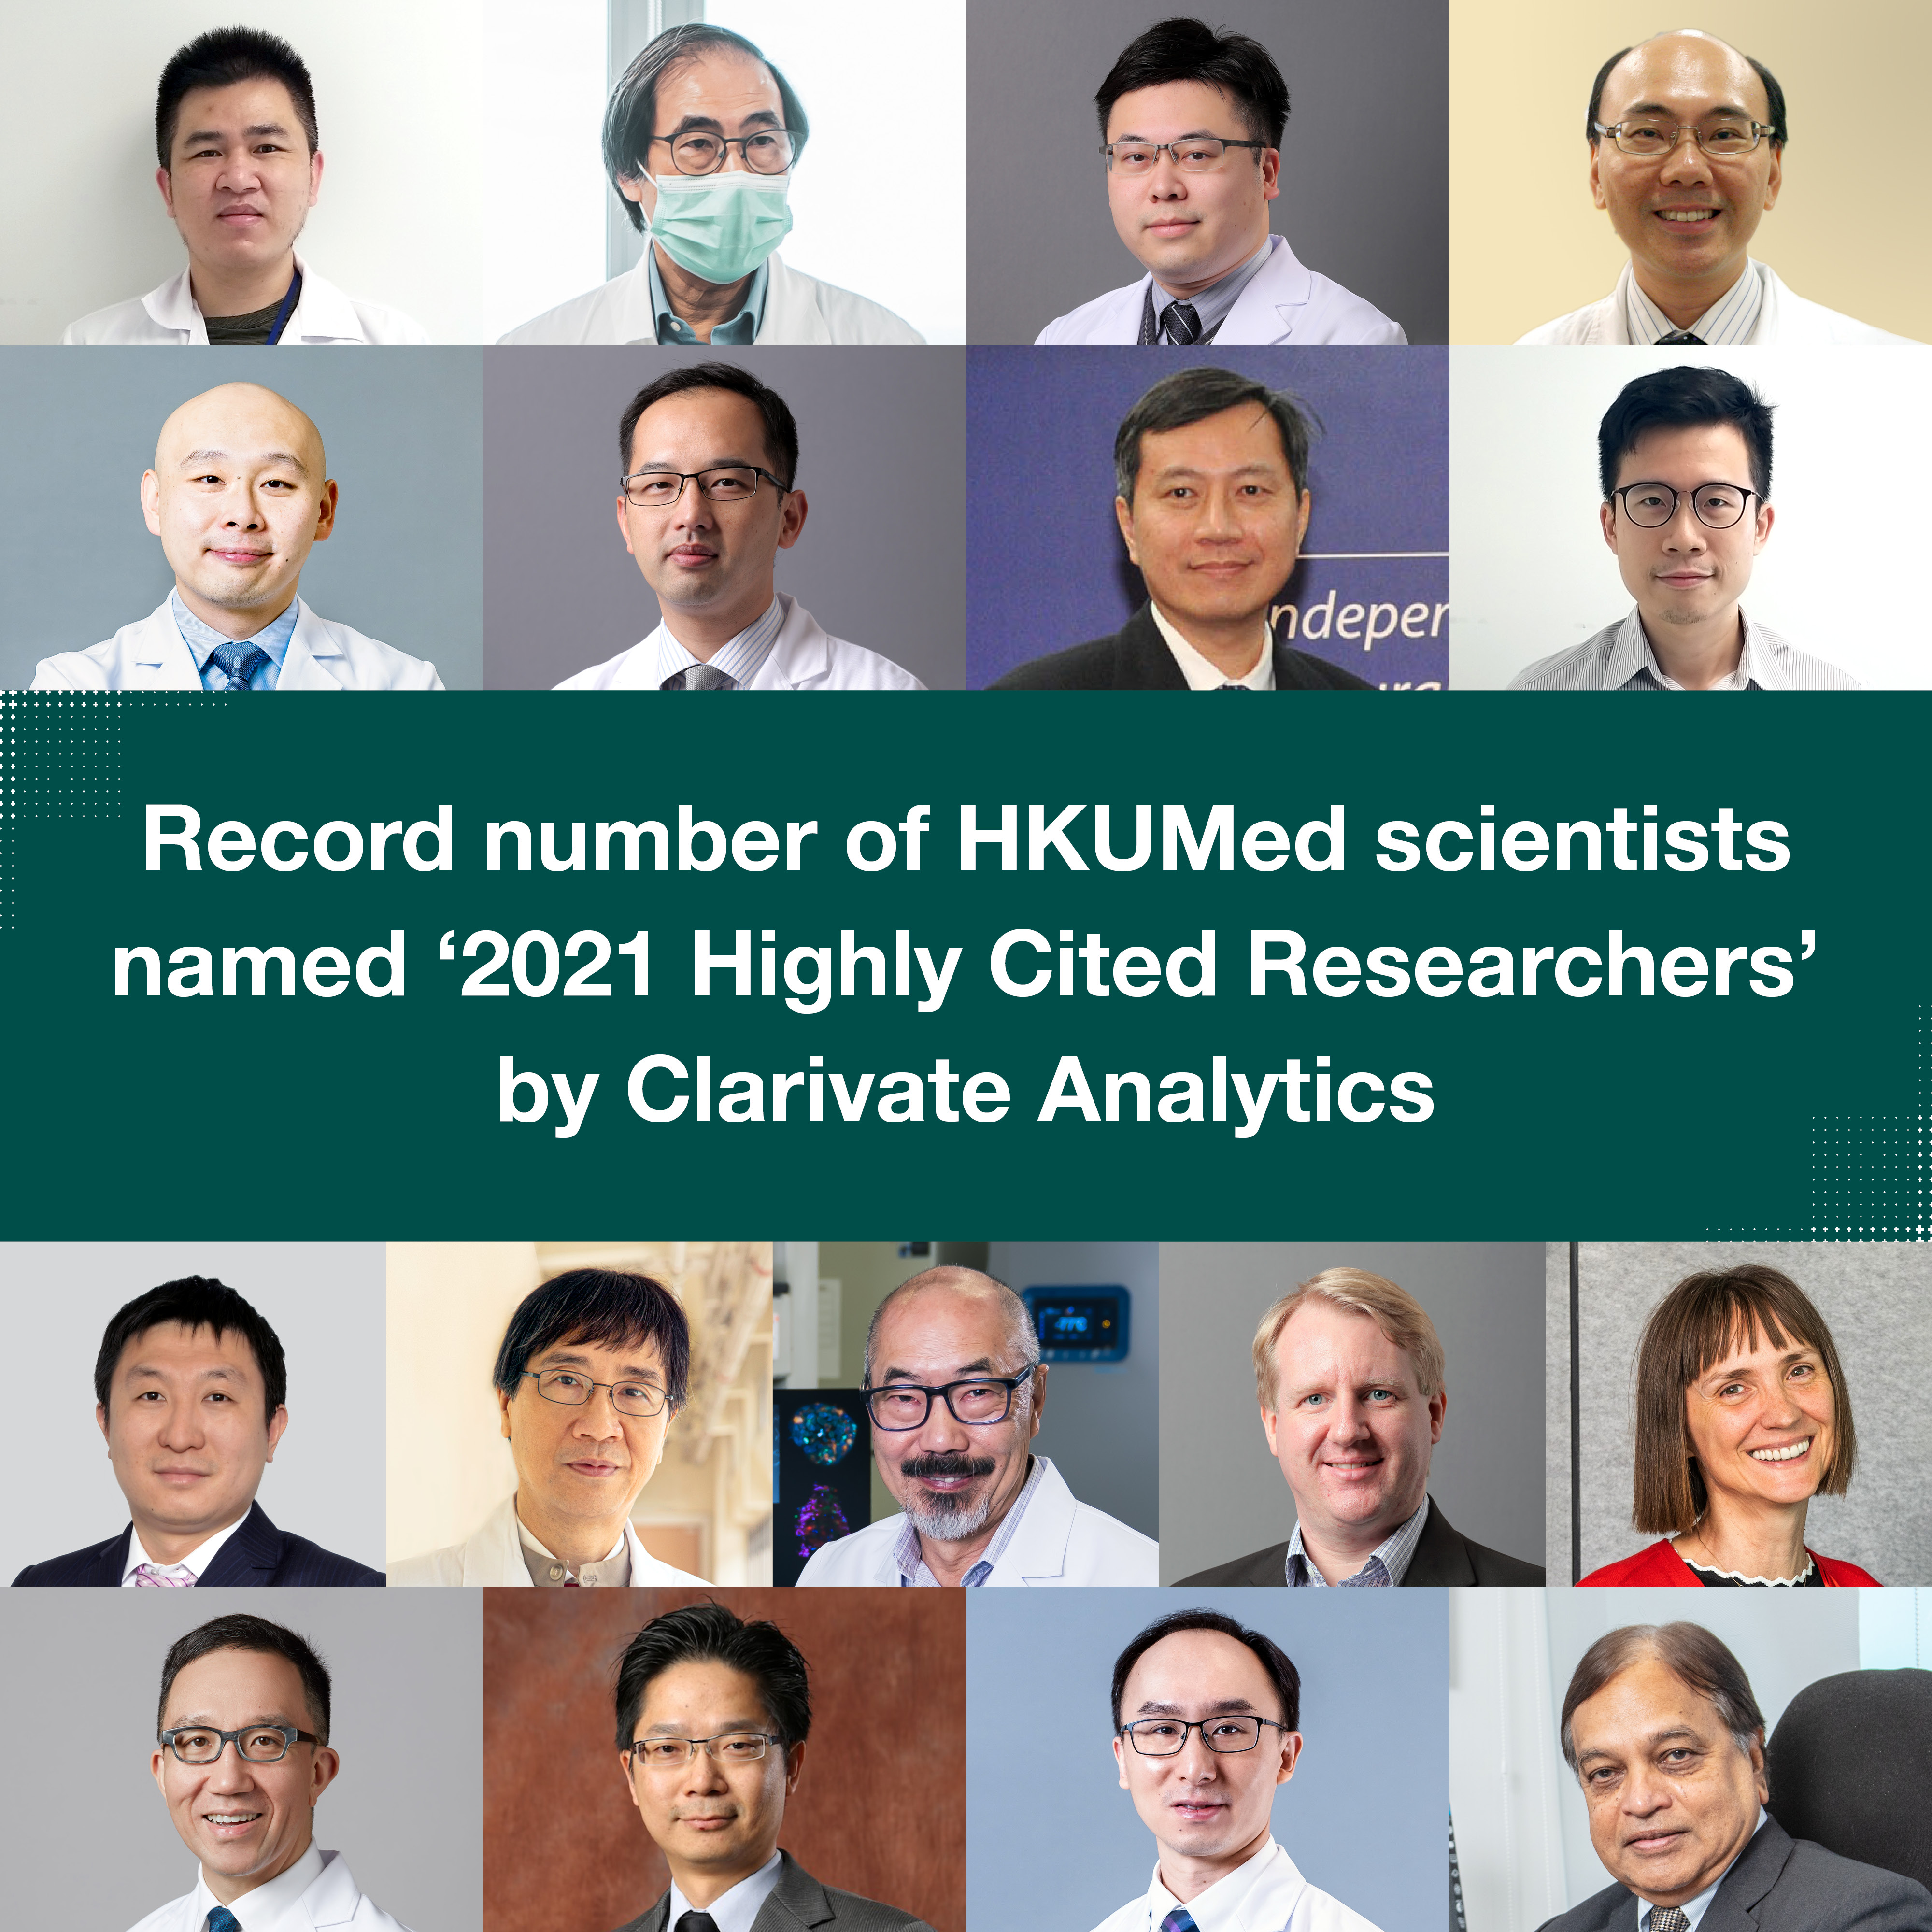 The seventeen academics from HKUMed who top the list of Highly Cited Researchers of 2021